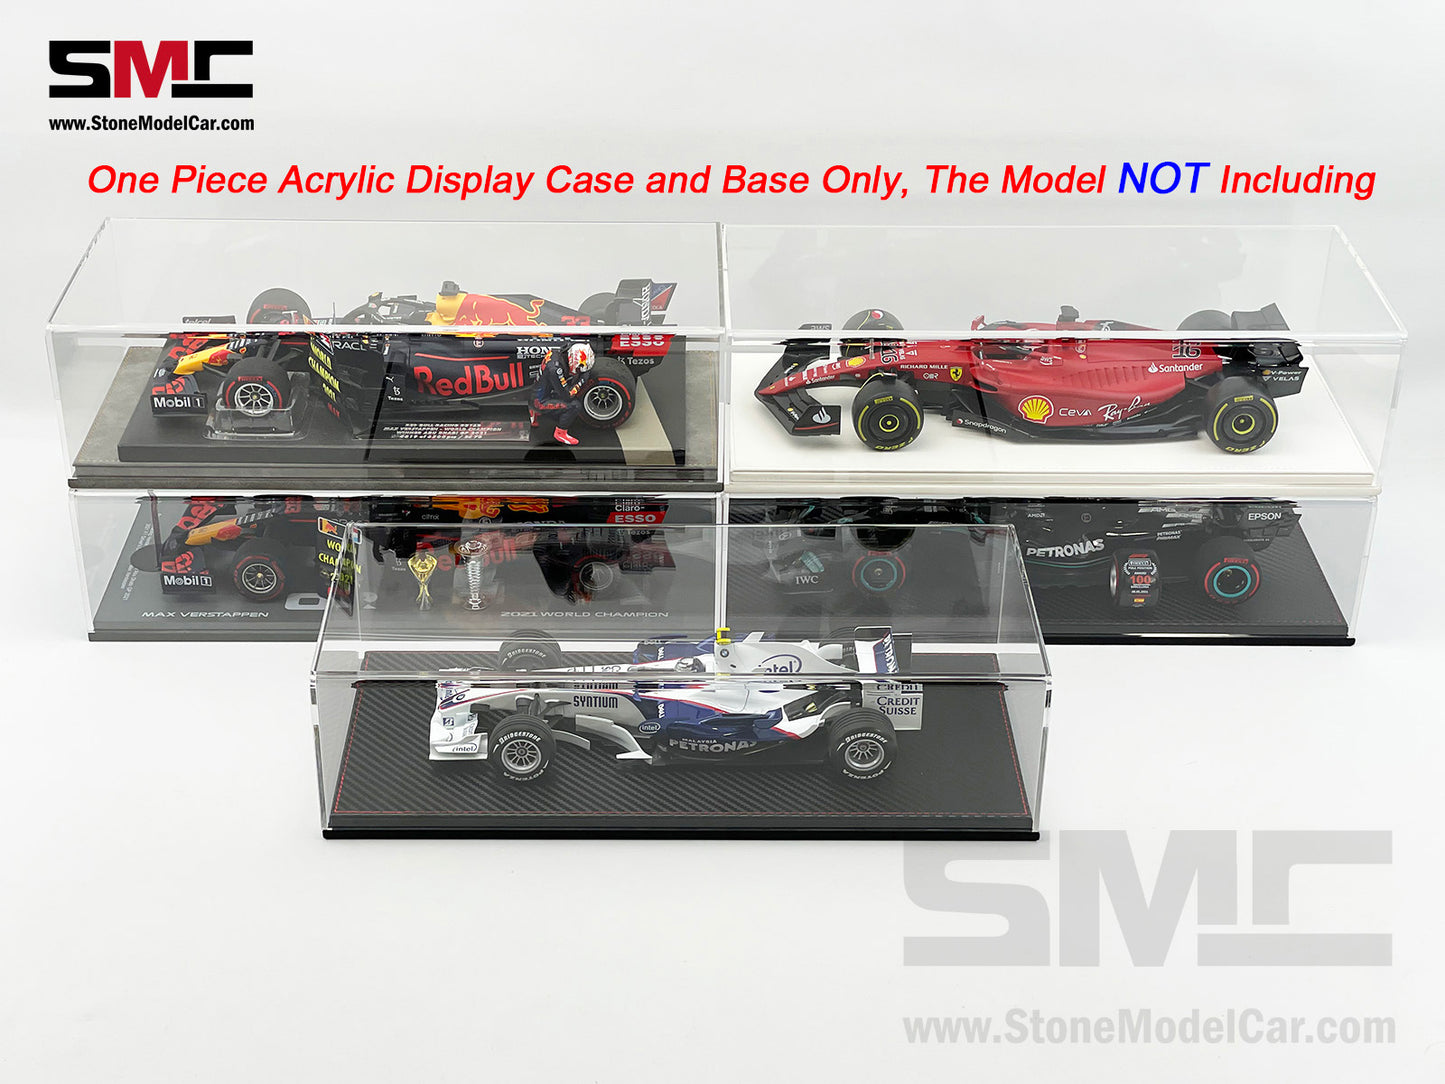 Premium Acrylic Display Cover & Show Case with Carbon Fiber Style Base for 1:18 Car Models